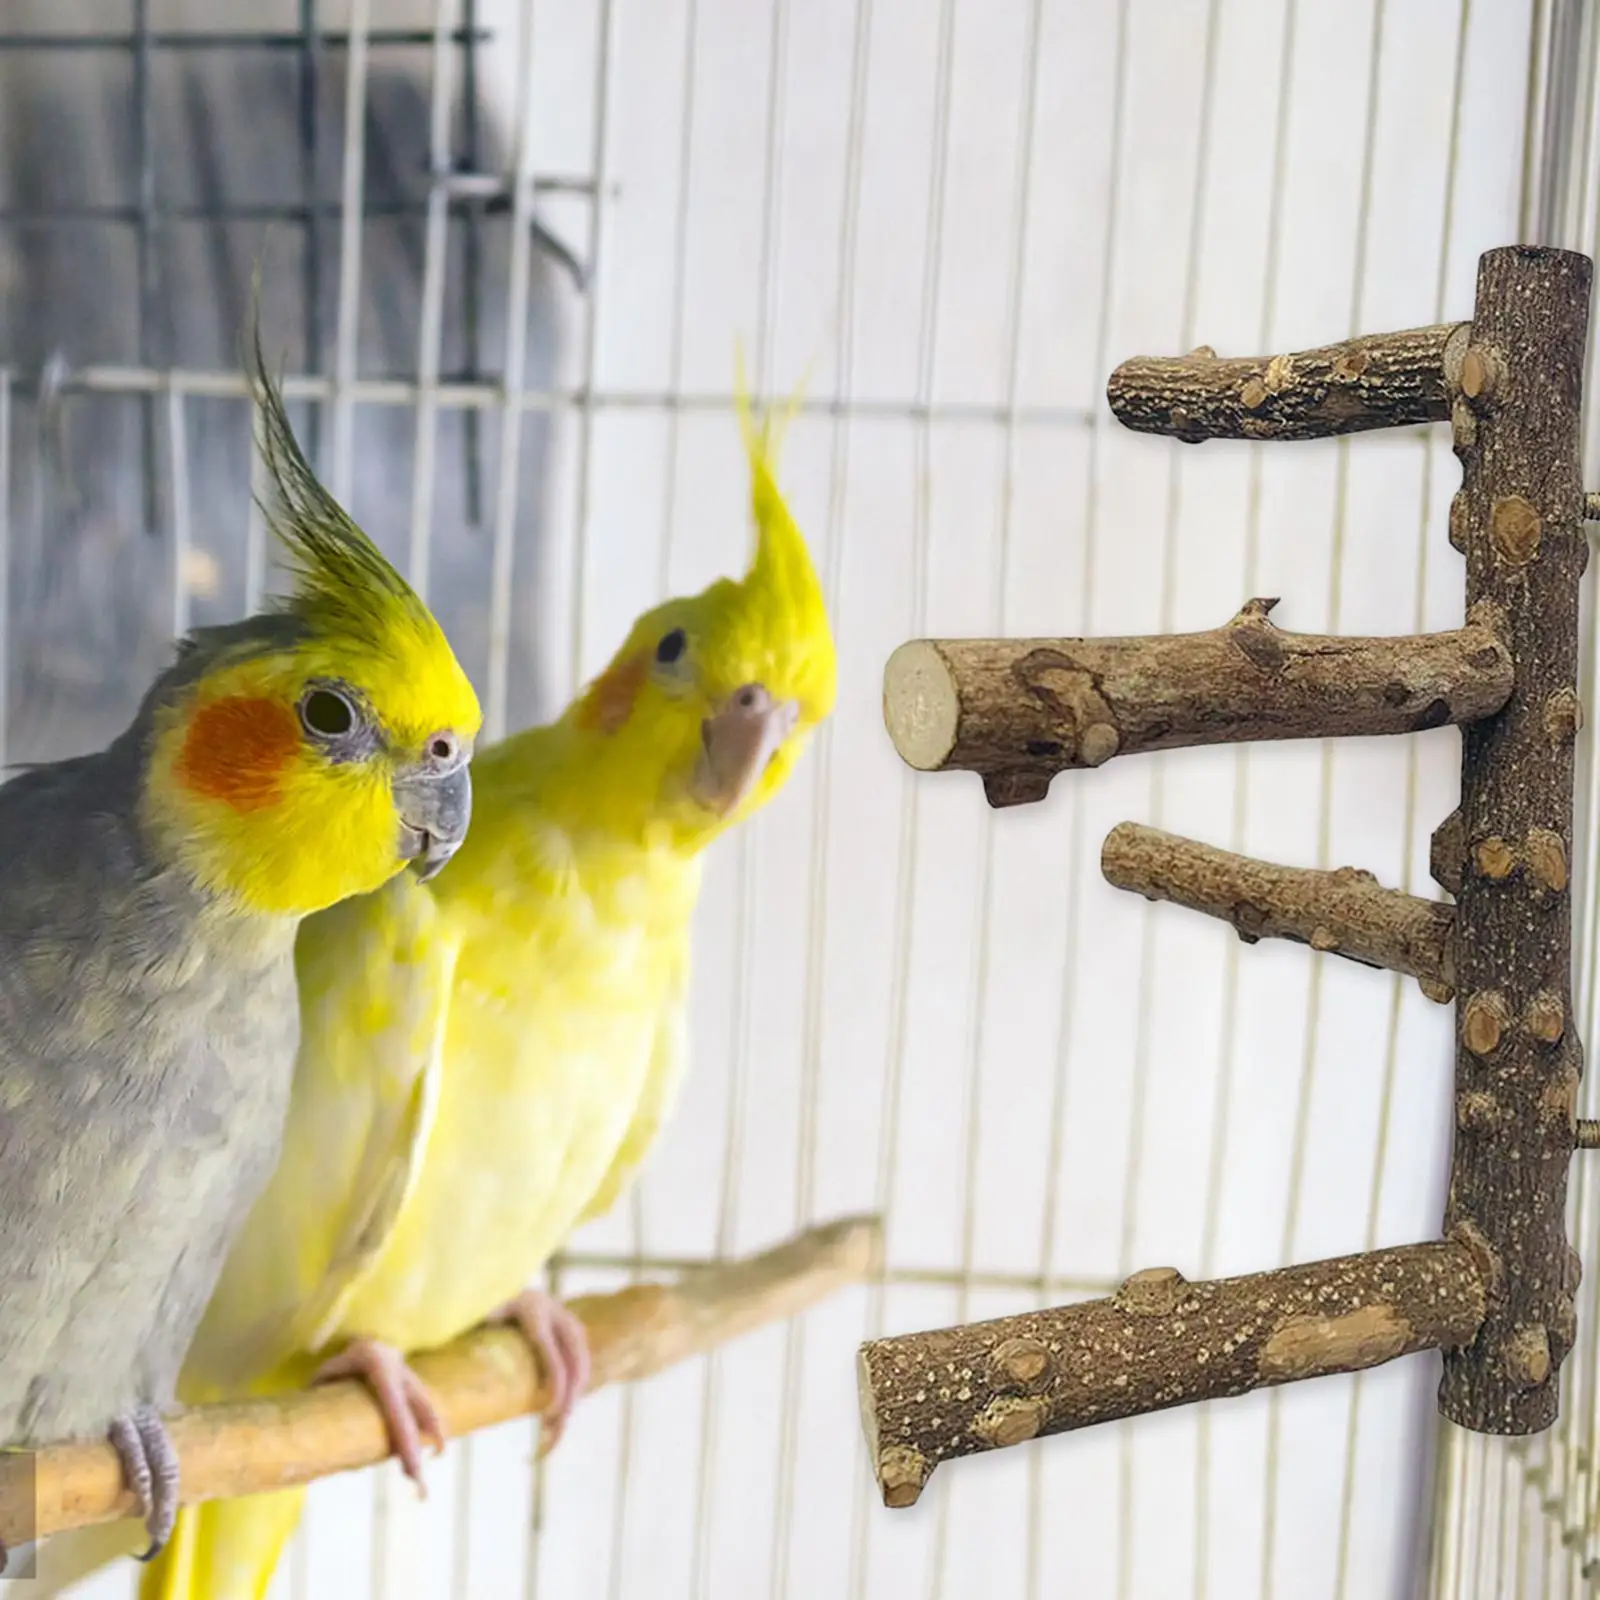  Perches ,Wooden Pole Hanging Training Toy .Paw Grinding Standing .Pet Parrot Chewing Bite Toys for Budgies Cockatiels Macaws